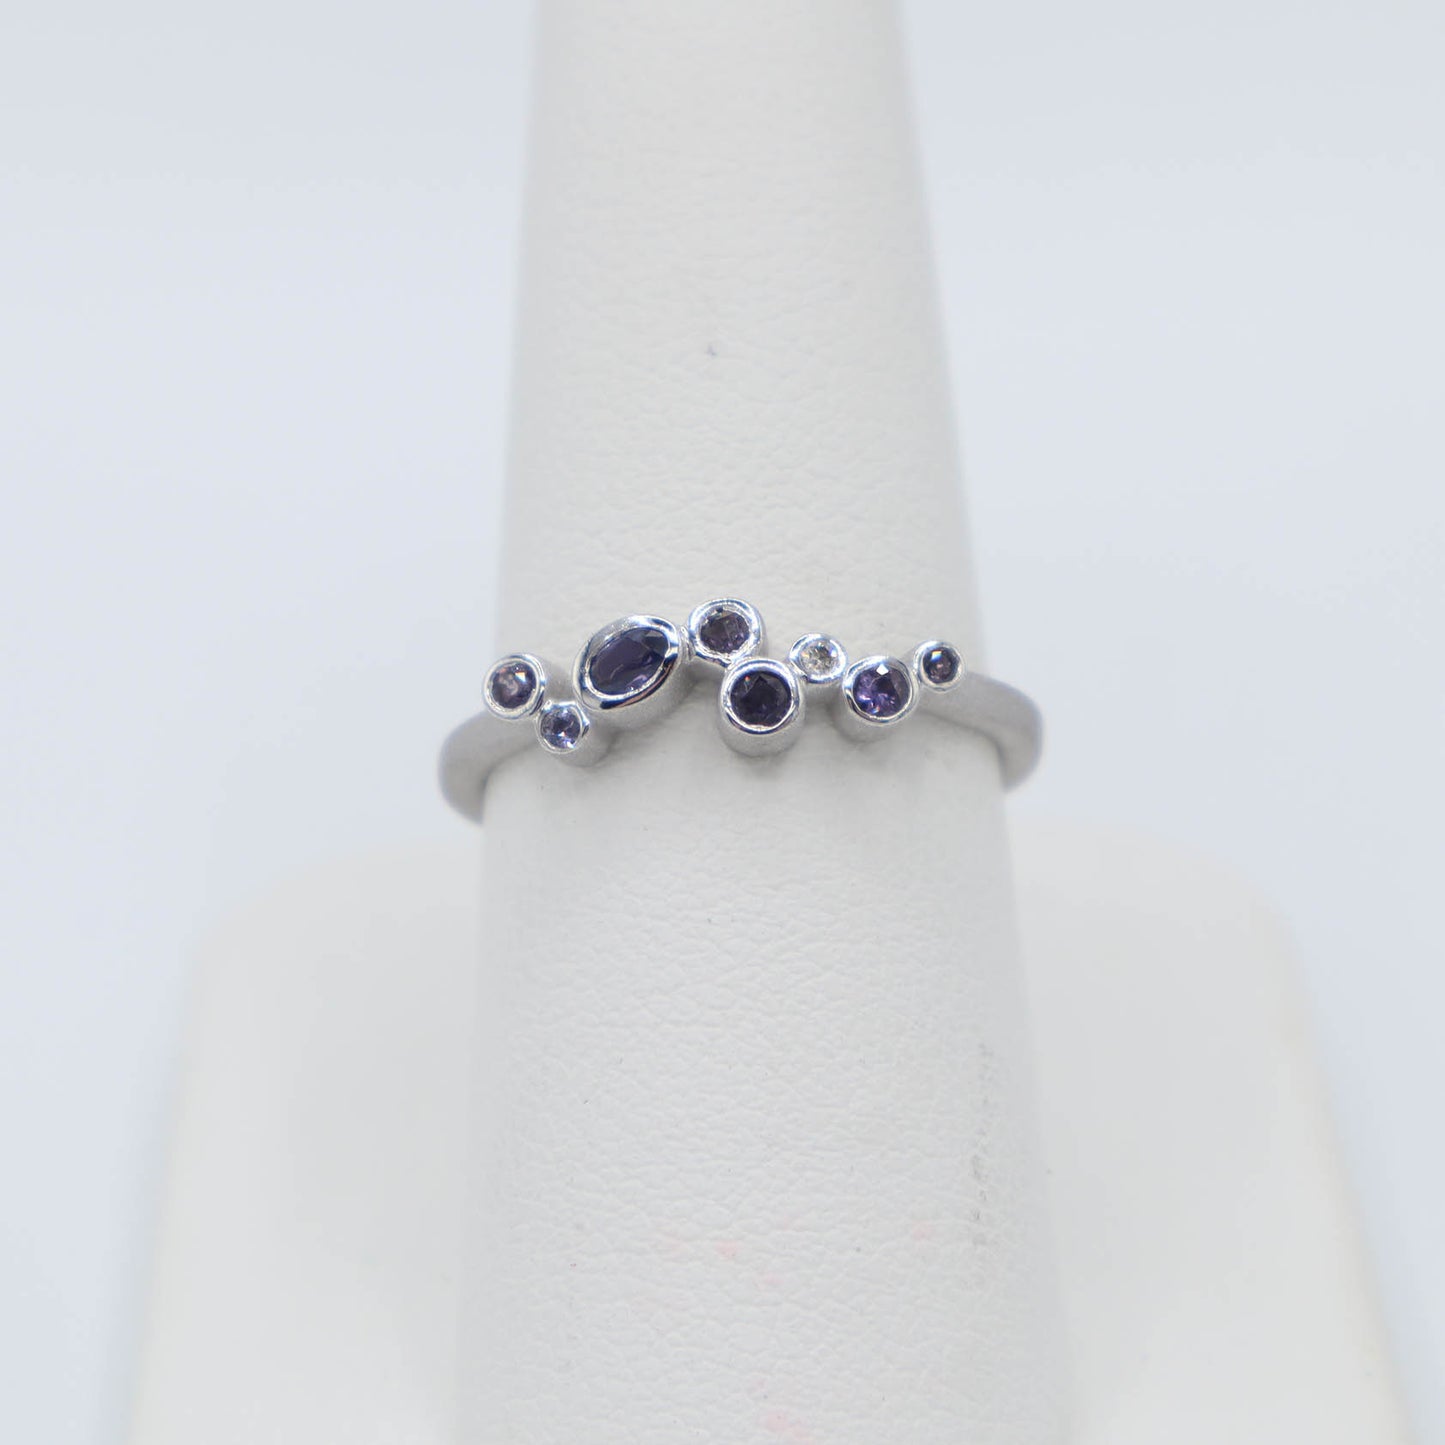 SALE 35% OFF - White Gold Ring with Sapphires and Diamonds